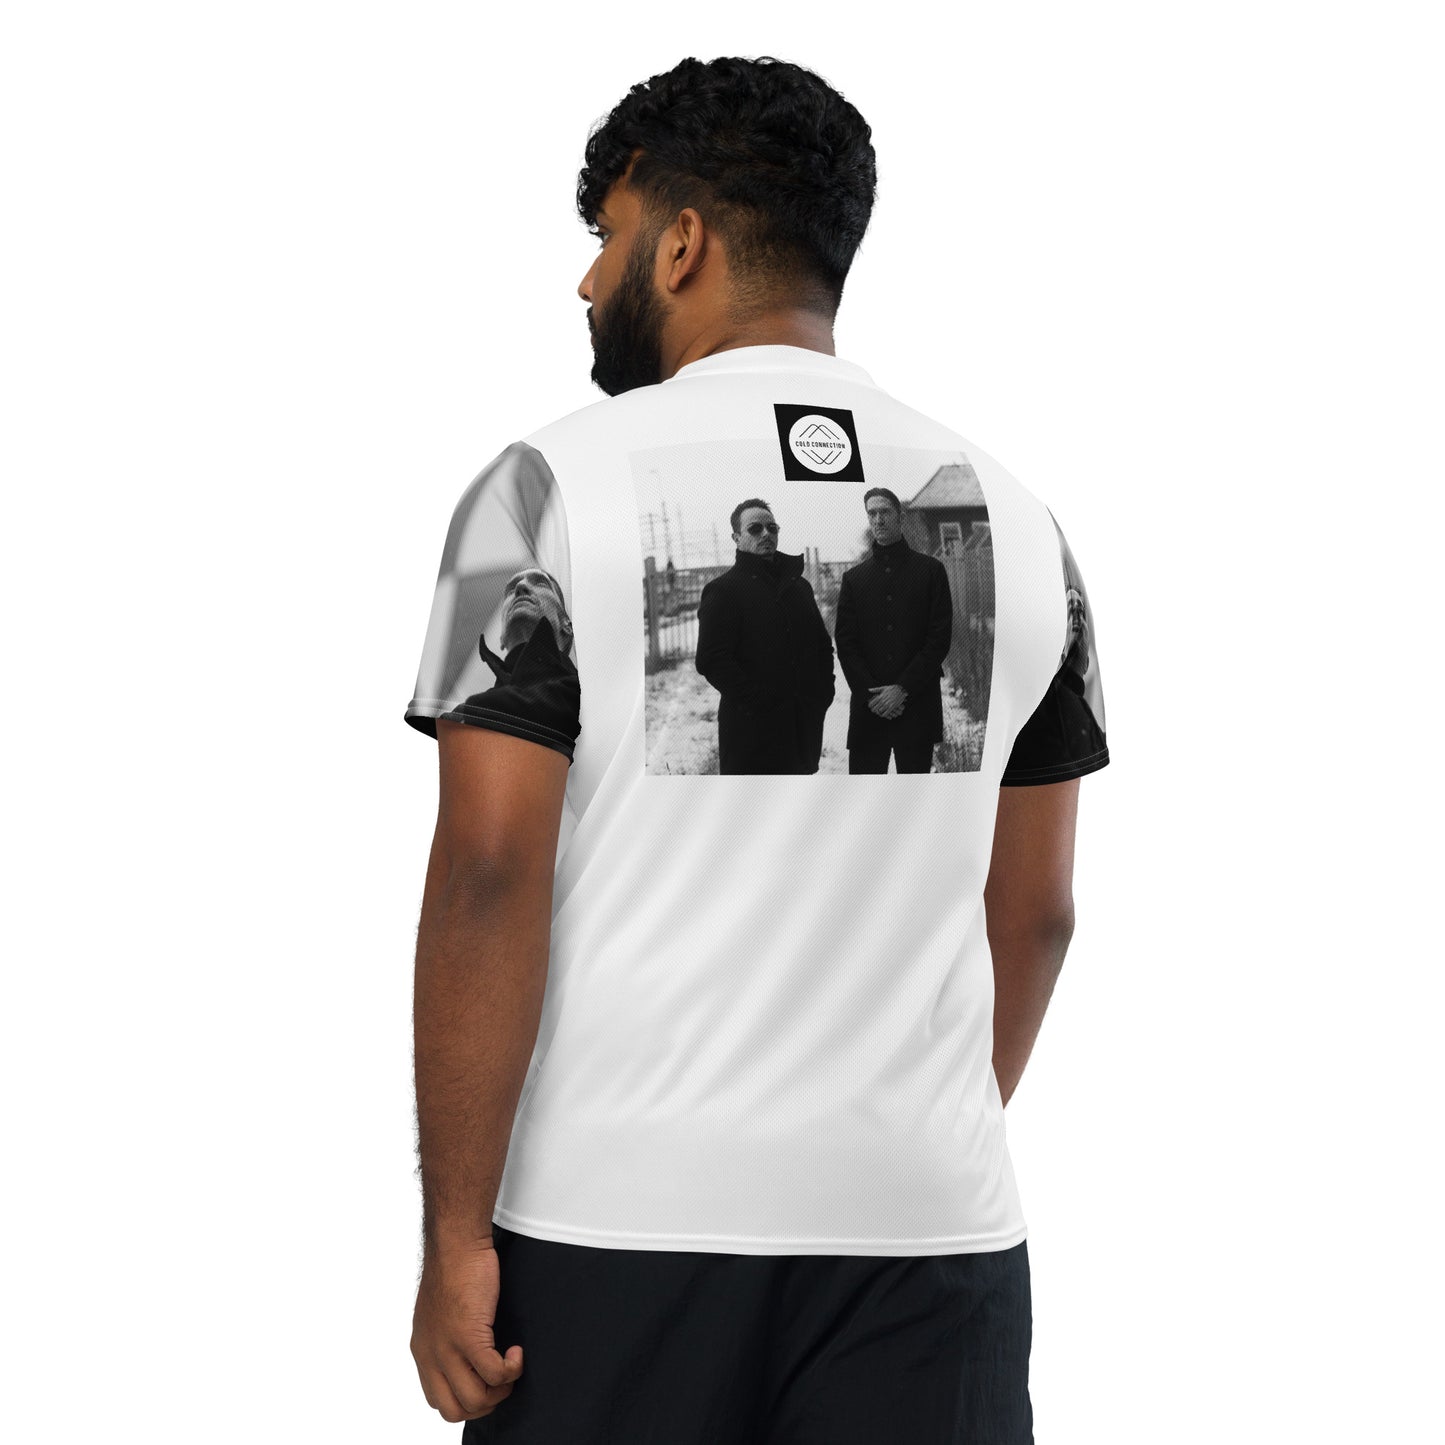 Cold Connection, official band photo and logo, Recycled unisex sports jersey